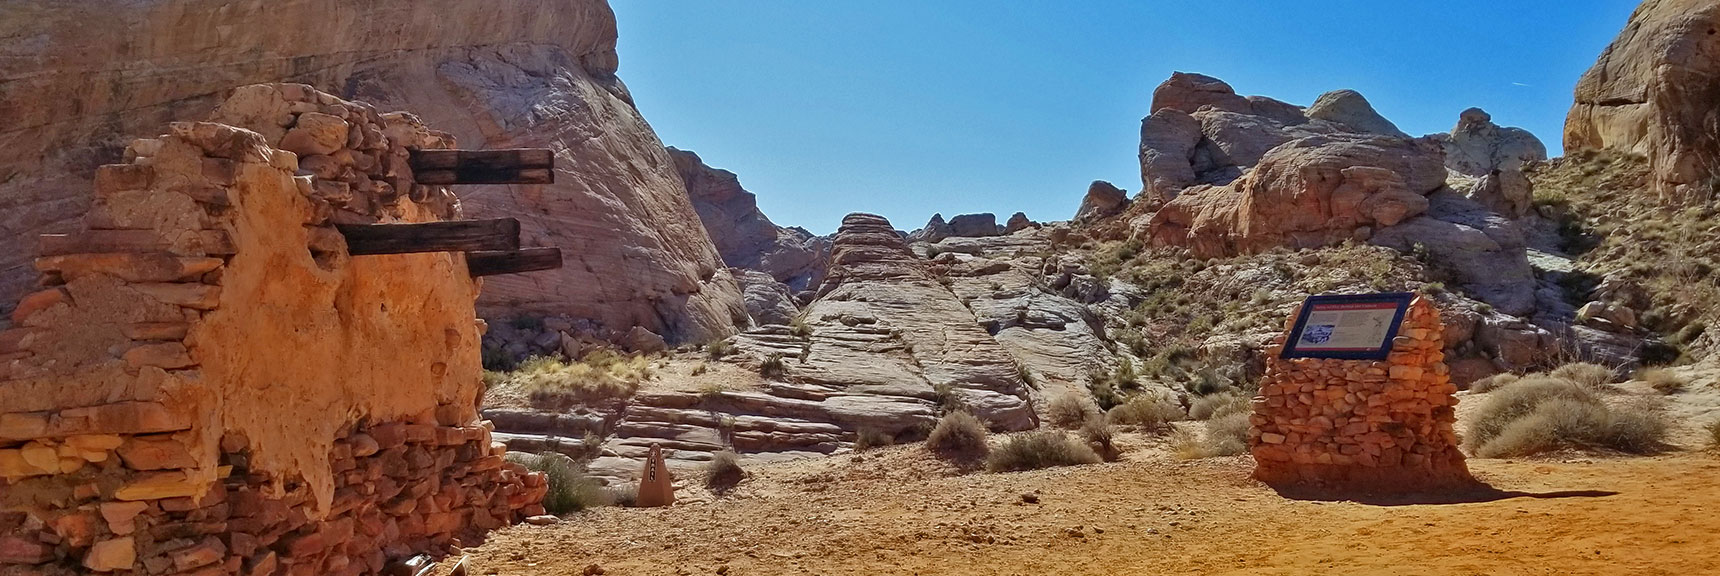 Abandoned Hollywood Movie Set for the 1965 Movie "The Professionals" on White Domes Loop Trail in Valley of Fire State Park, Nevada